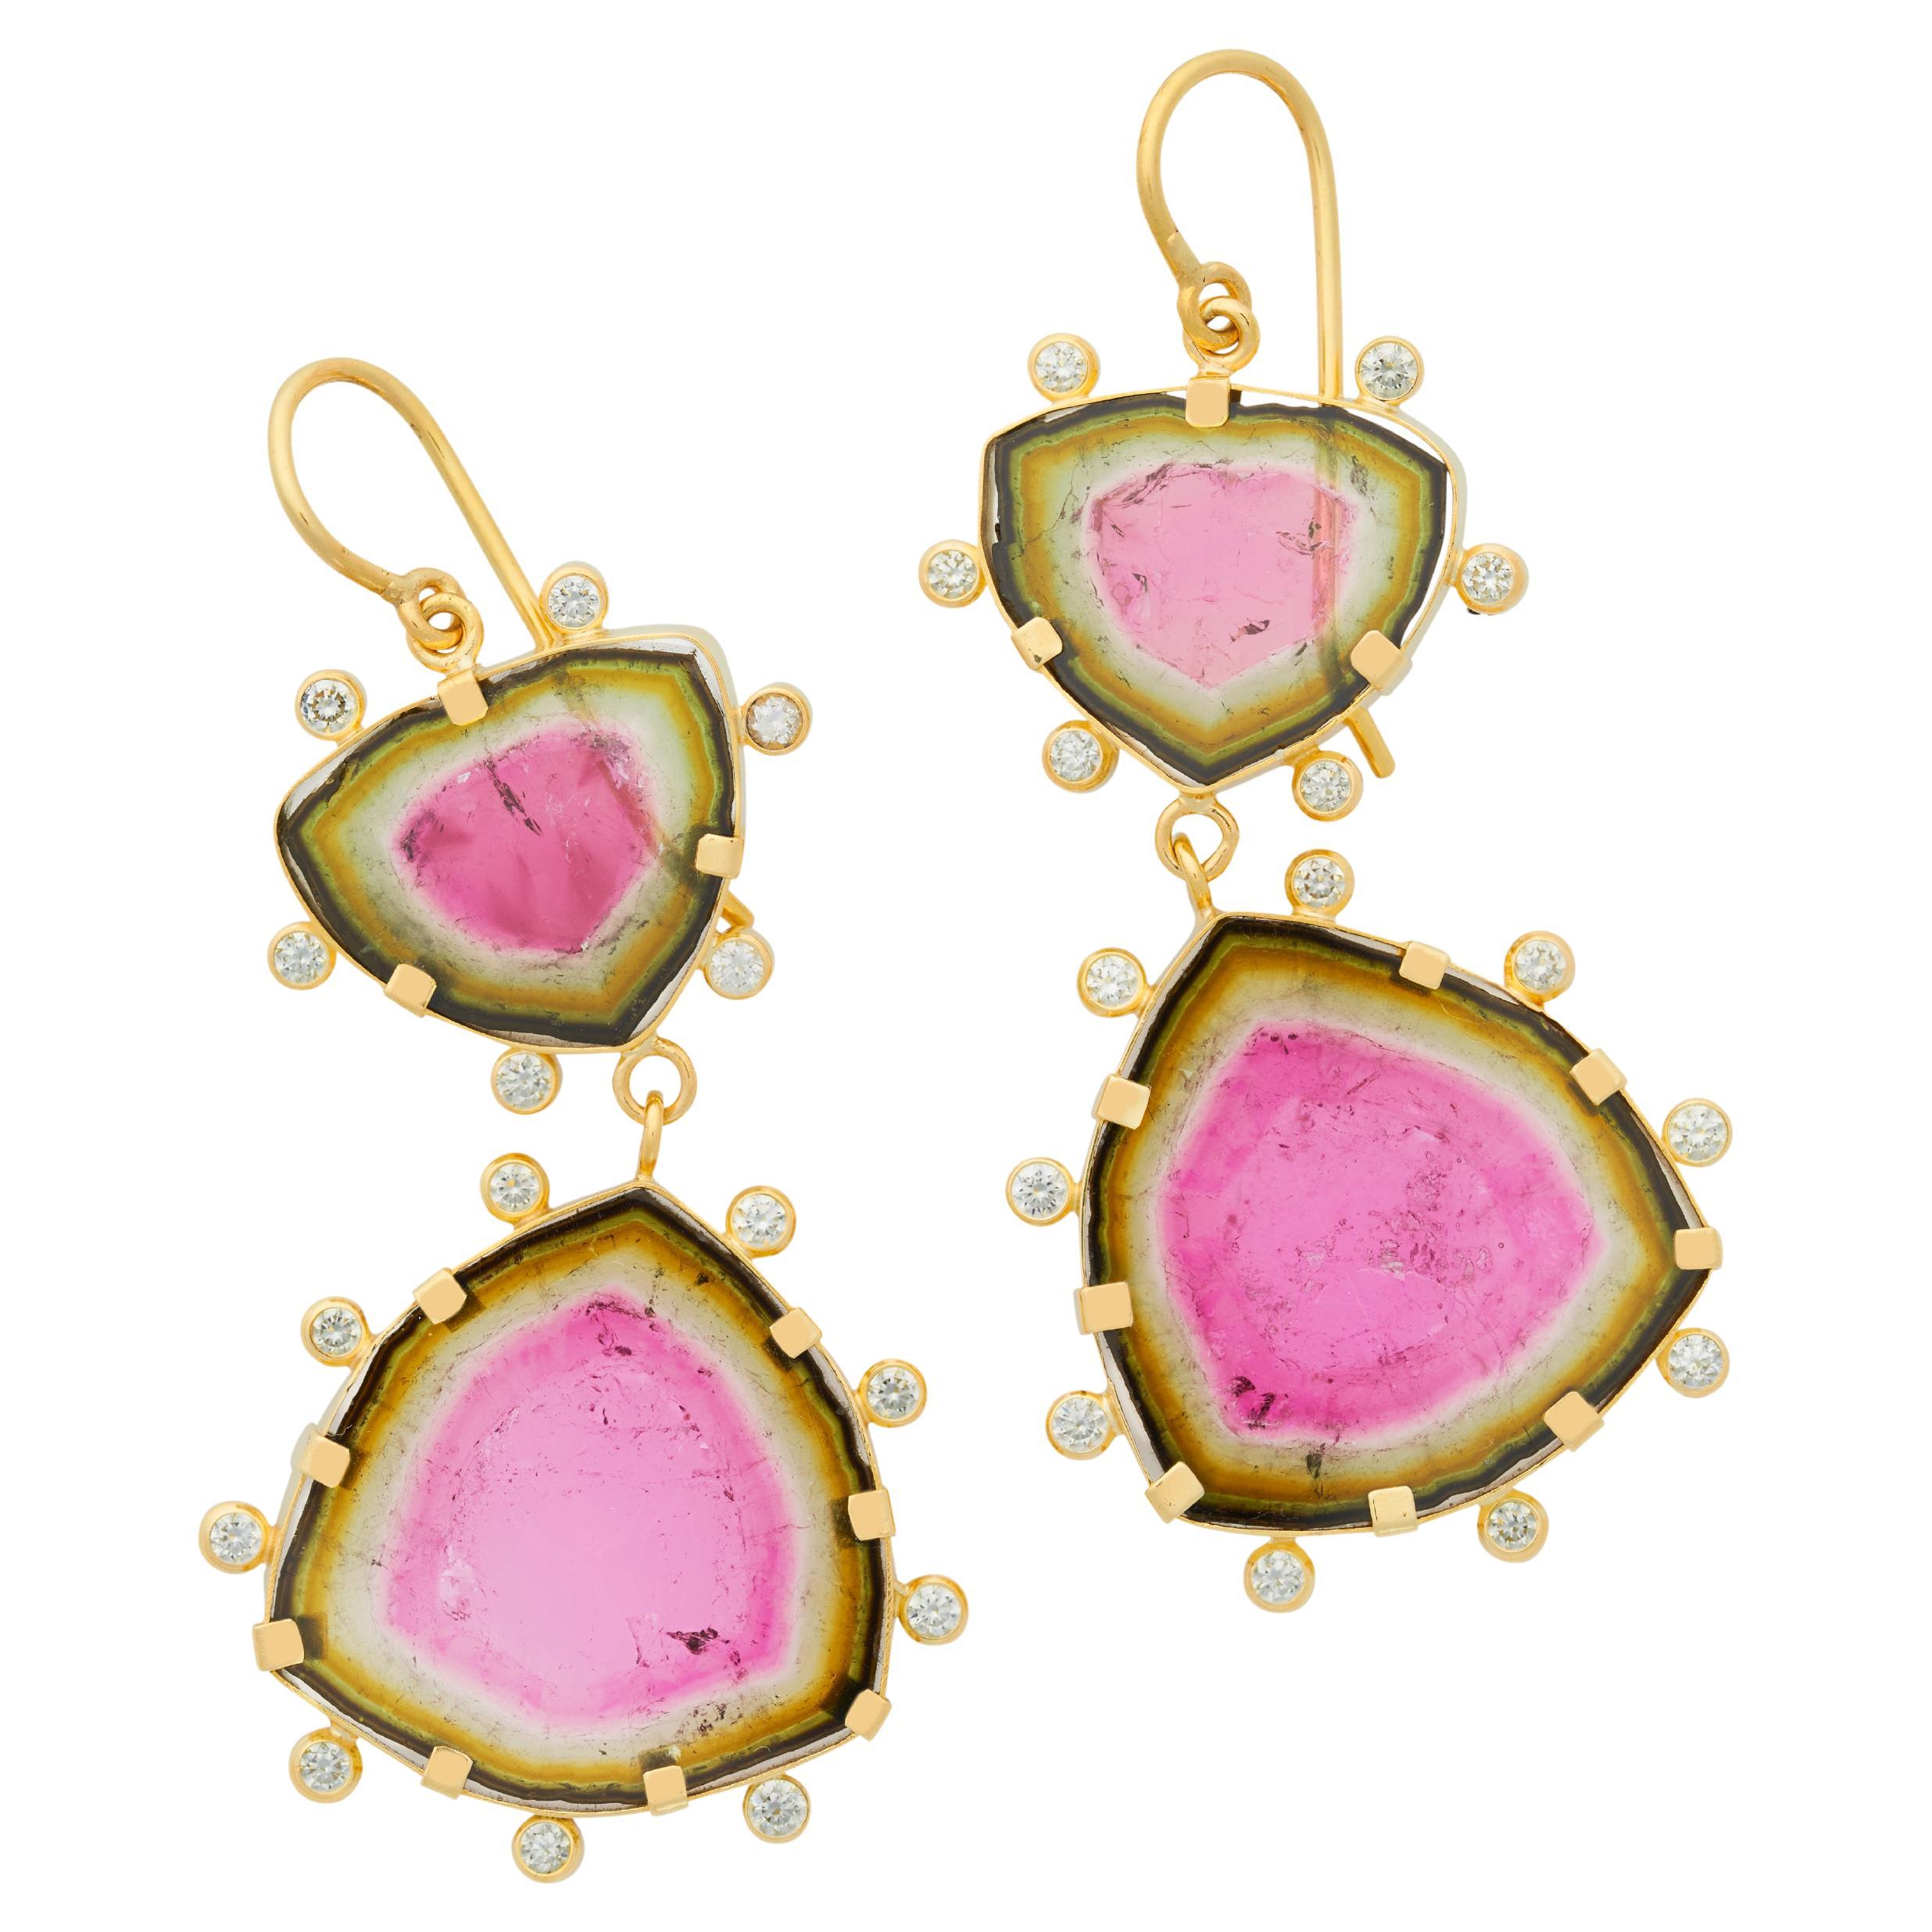 One-of-a-kind Handcrafted 18k Gold Watermelon Tourmaline and Diamond Earrings